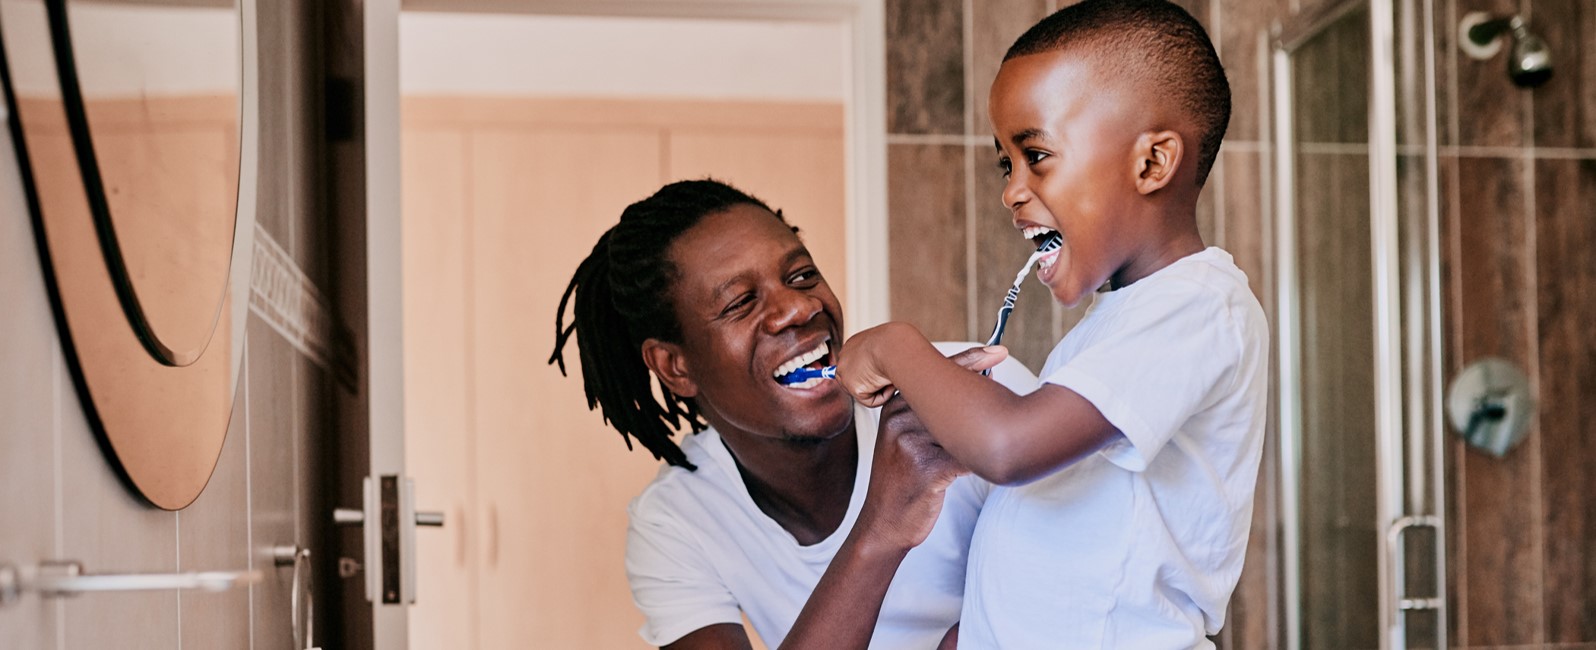 Photo of adult man brushing teeth with child in a bathroom.